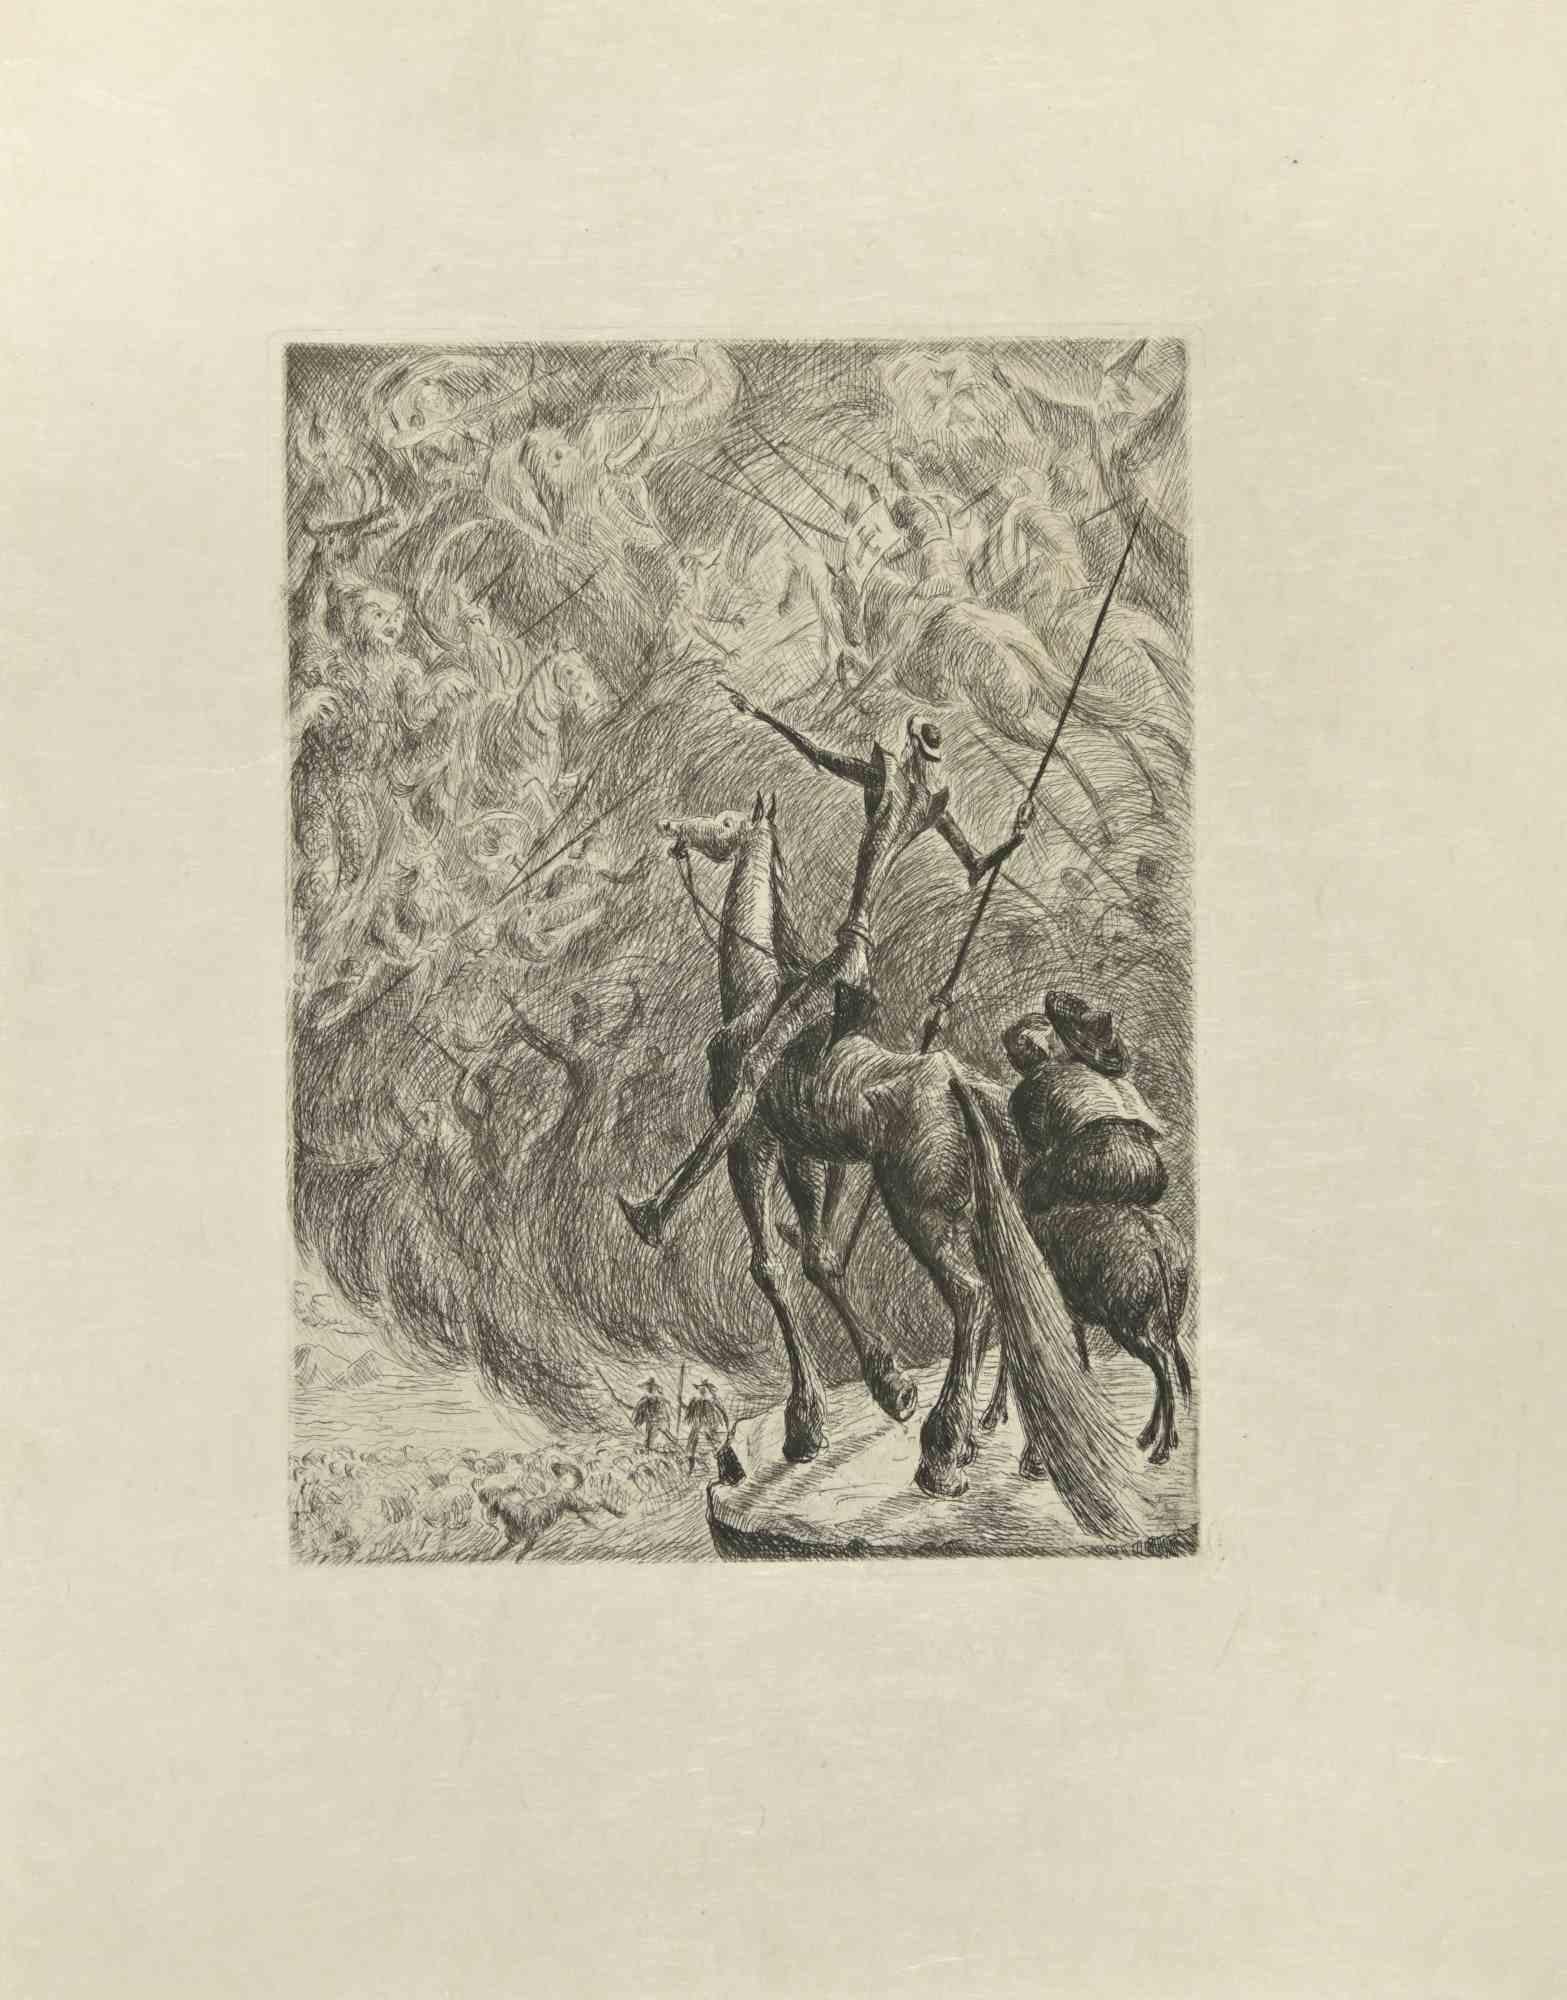 Don Quixote in Battle is an etching and drypoint print on ivory-colored Japanese paper, realized by Wladyslaw Jahl in 1951.

It belongs to a limited edition of 125 specimens.

Good conditions.

The artwork represents a visual scene from Don Quixote